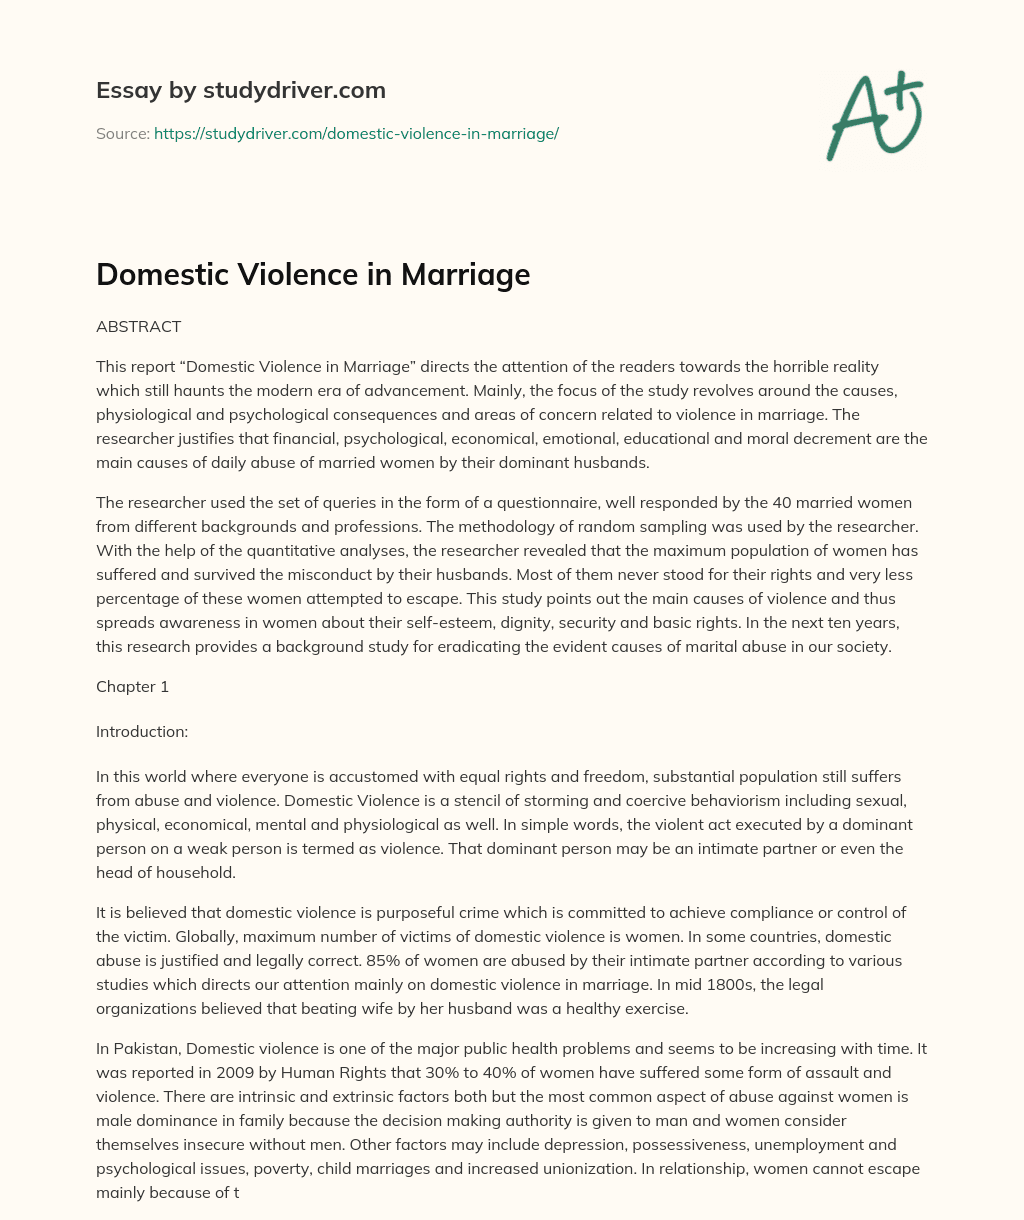 Domestic Violence in Marriage essay